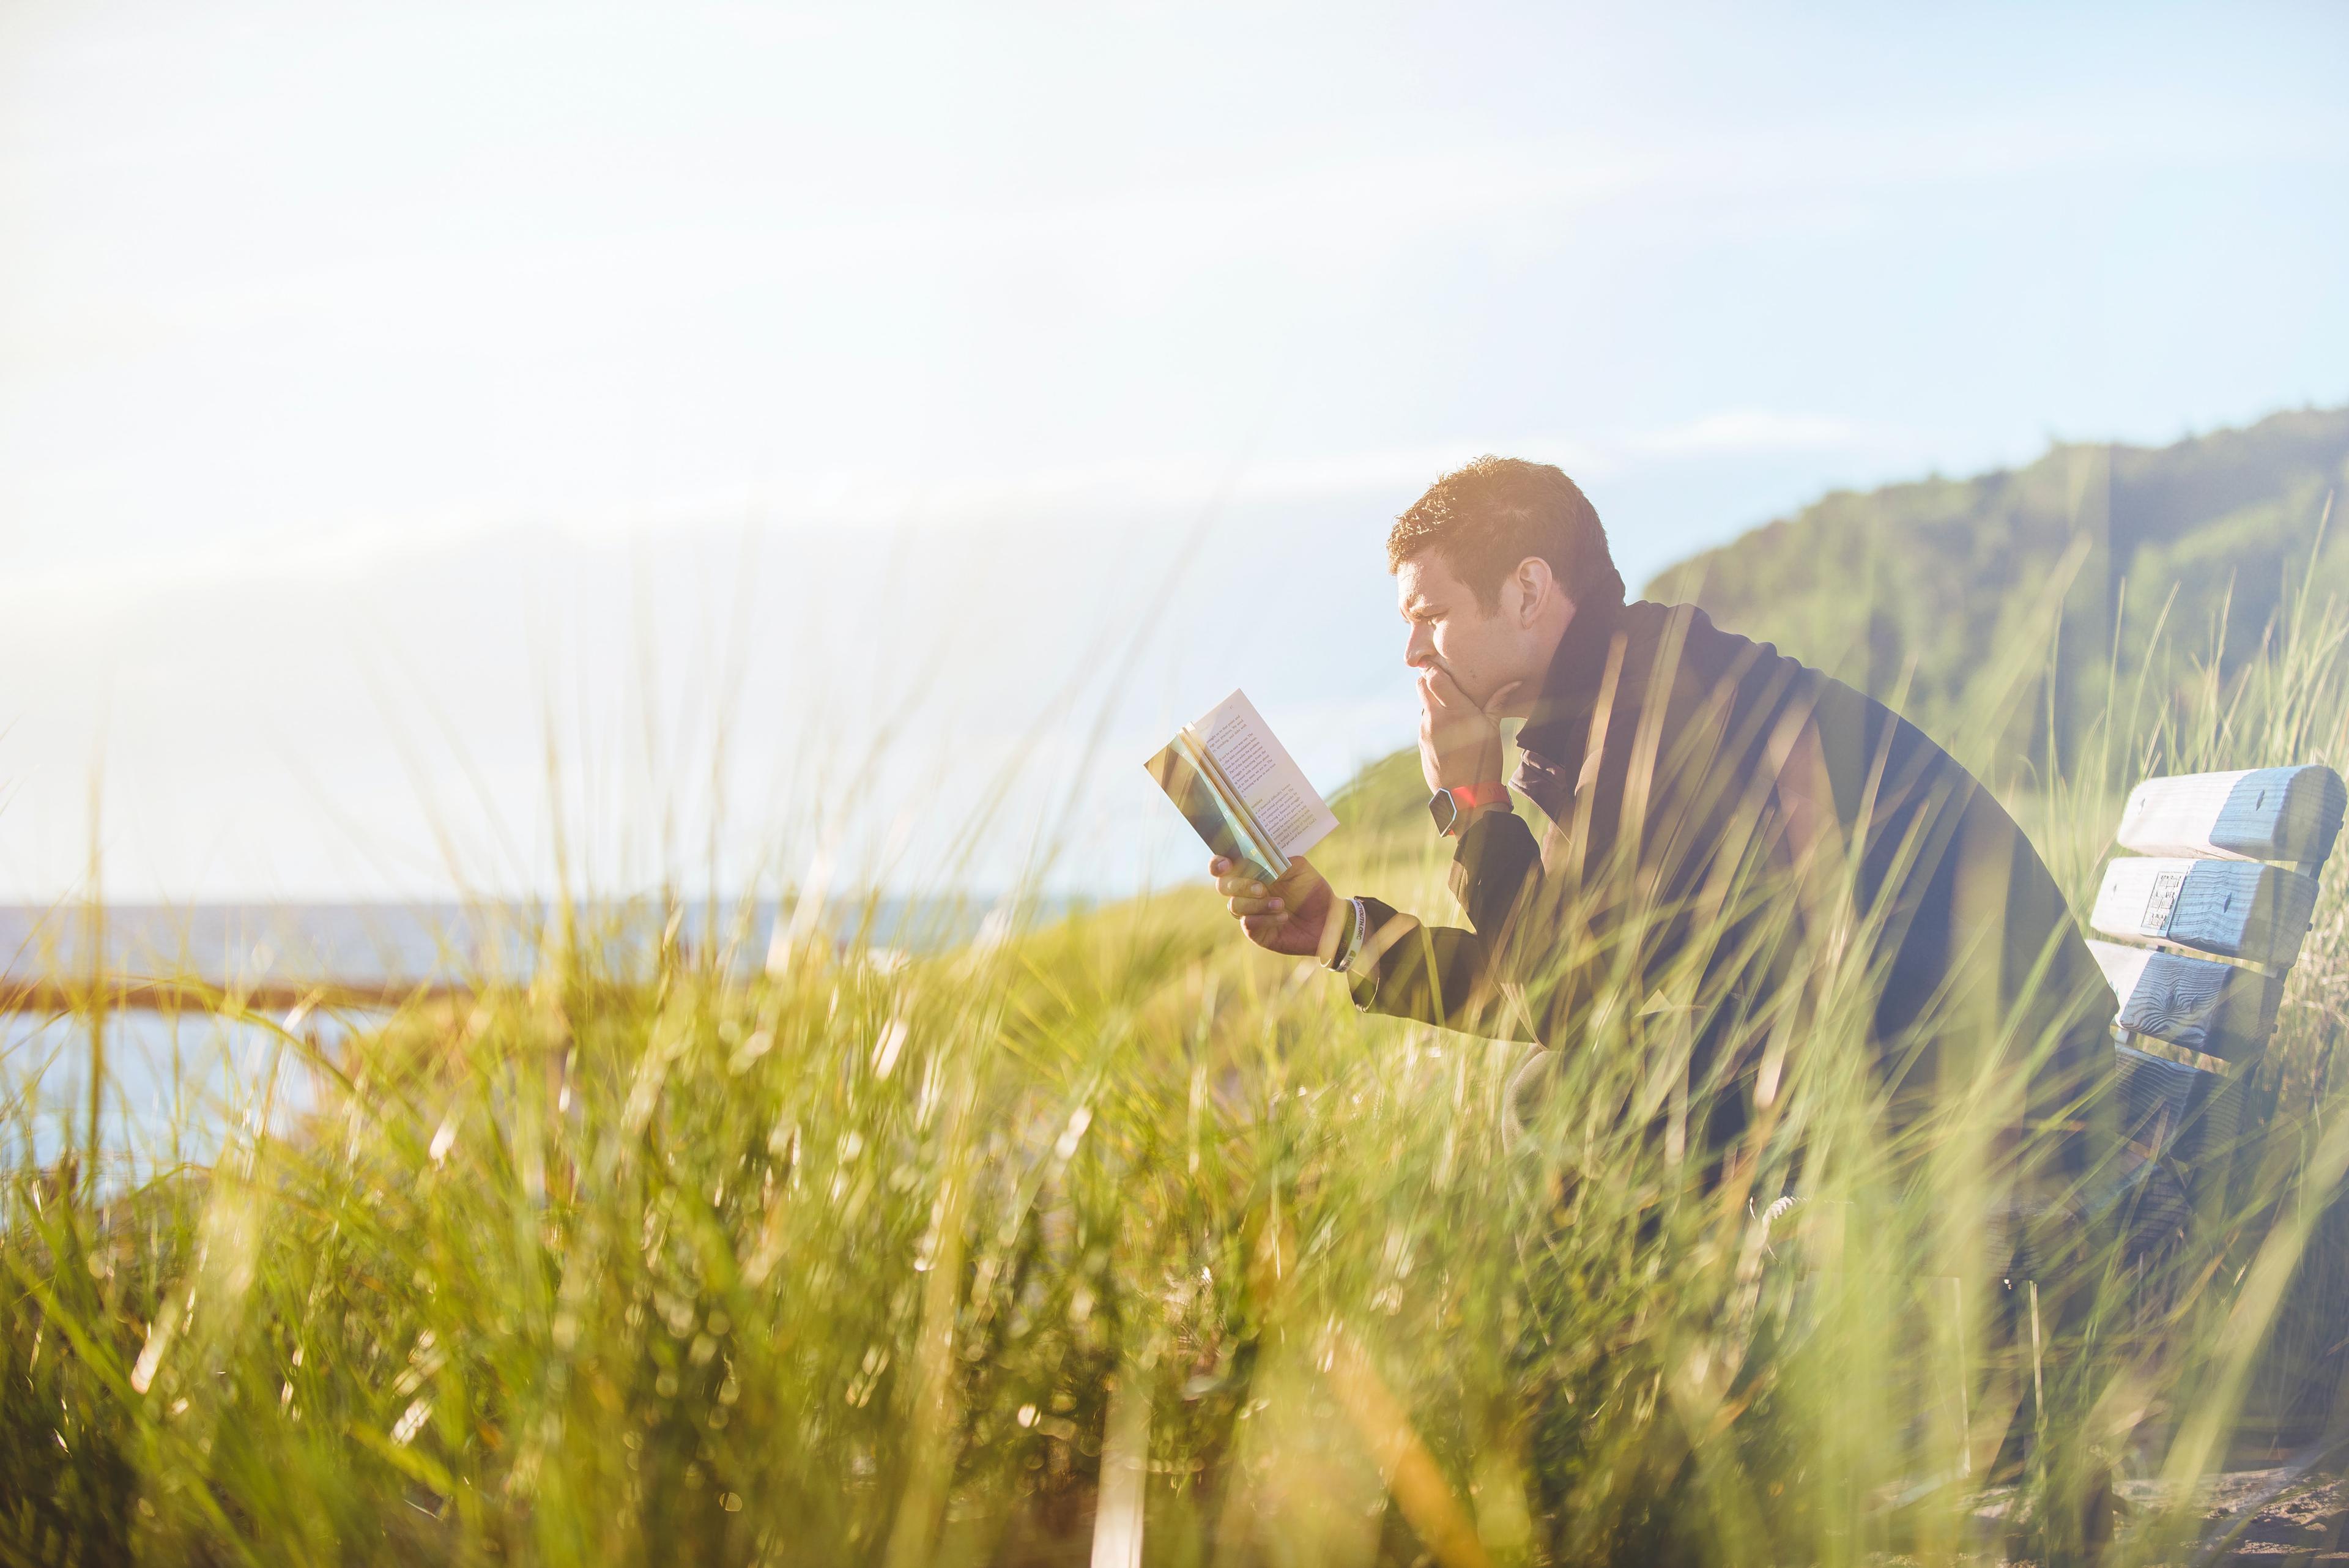 A man sits on a bench in tall grass by water, reading a book